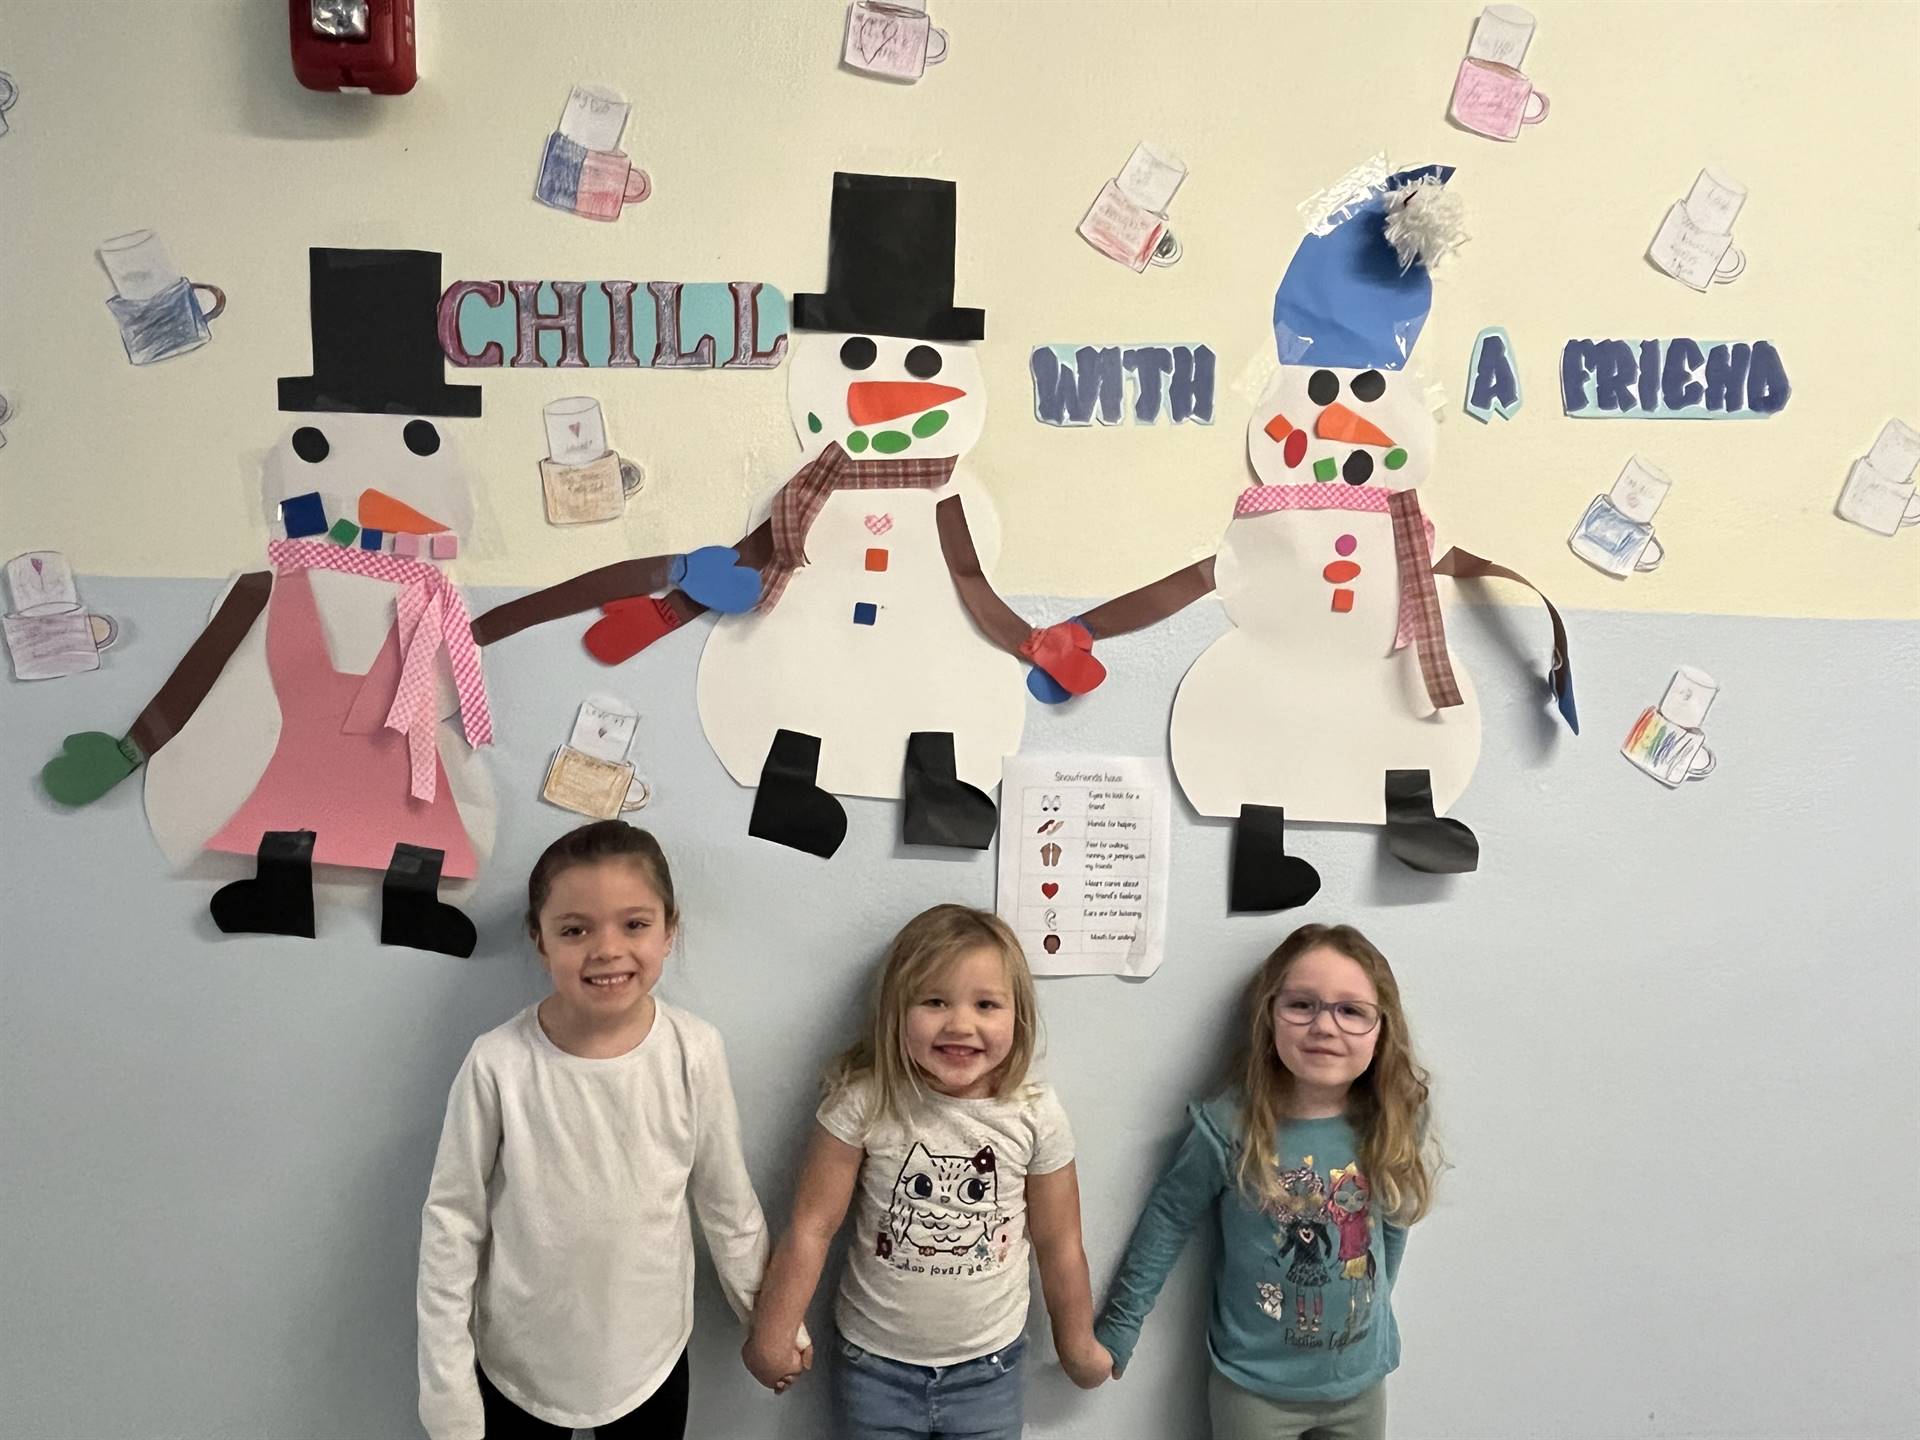 3 students hold hands with 3 snow friends on wall behind them